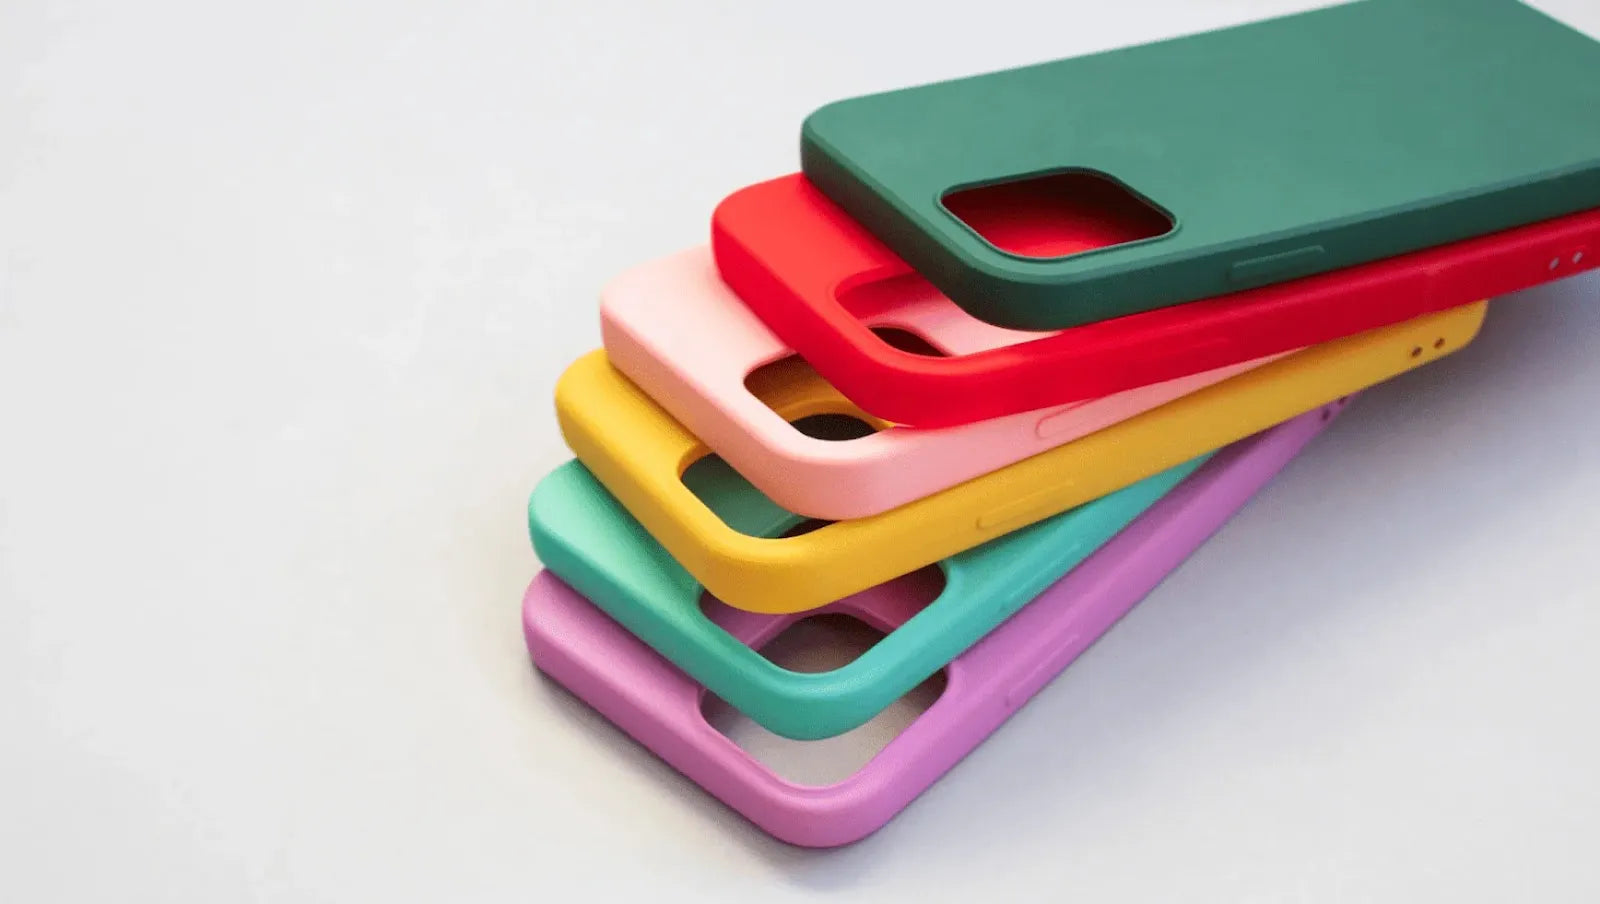 Silicone: Probably the Best Material for a Phone Case